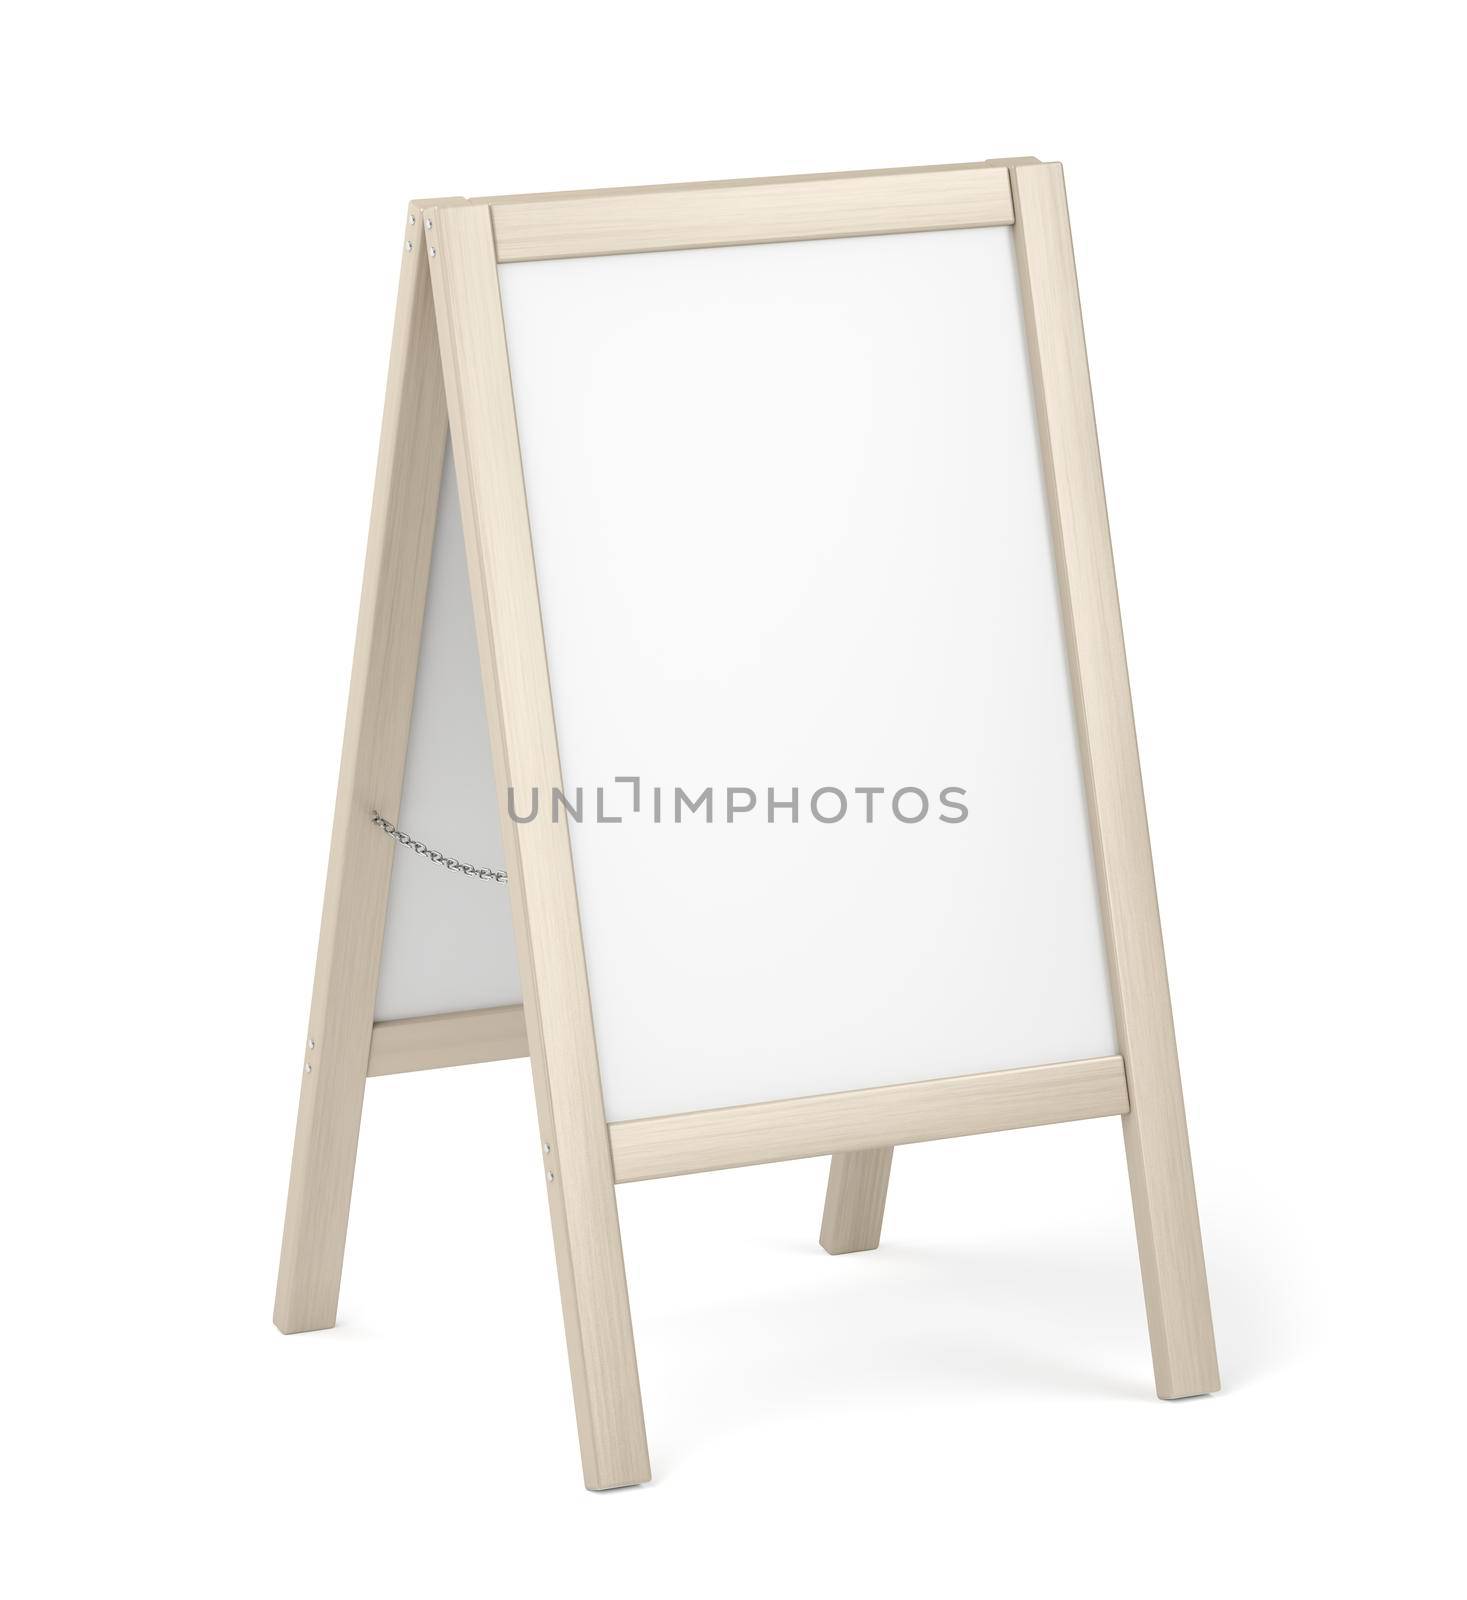 Advertising stand with wooden frame by magraphics